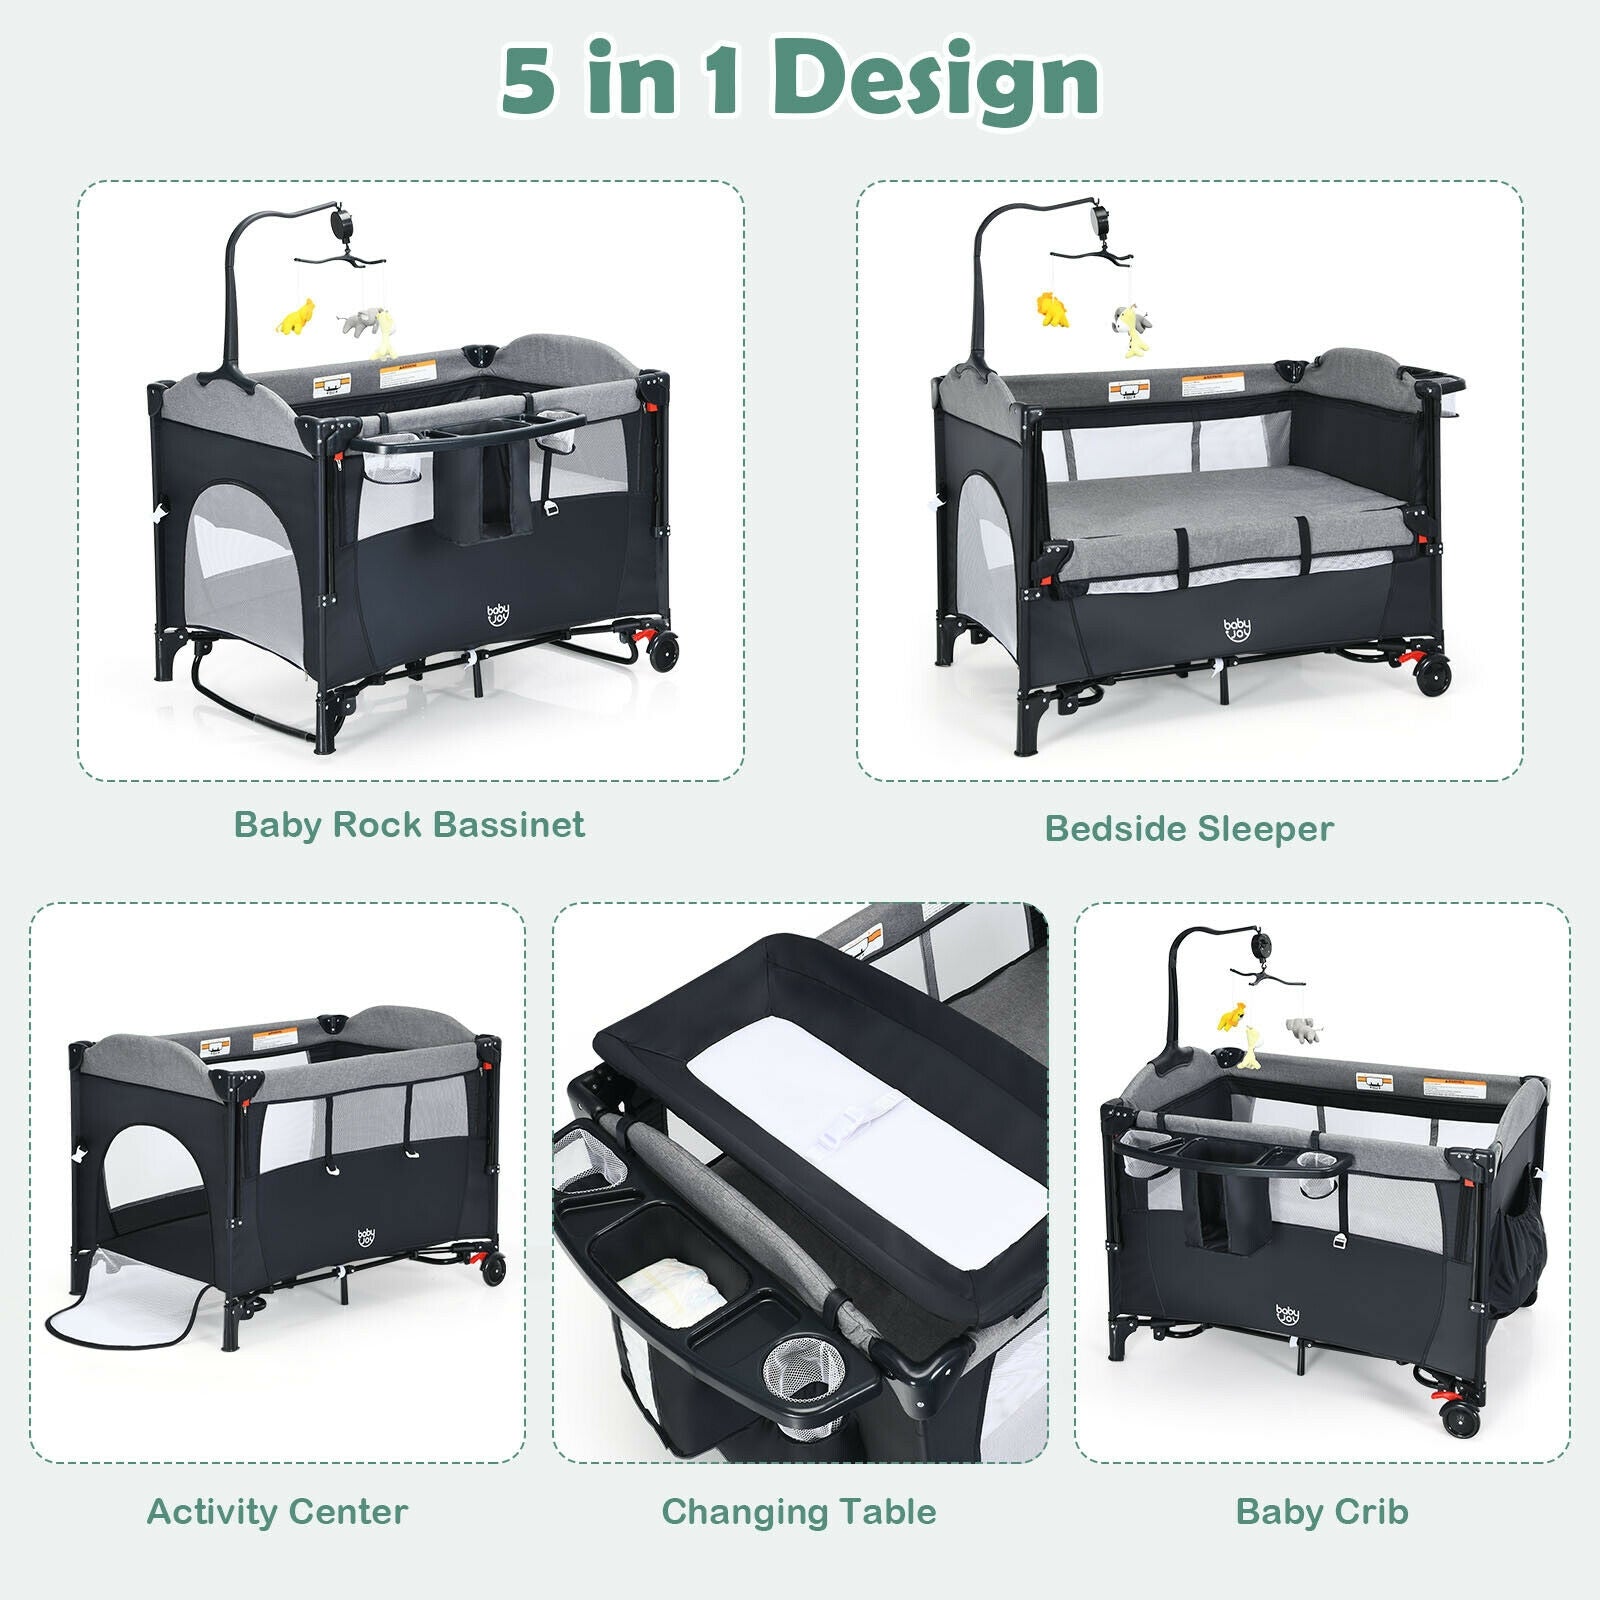 Versatile 5-in-1 Baby Bed: Experience the ultimate convenience with our multifunctional baby bed, offering 5 essential features in one. It serves as a diaper-changing table, bassinet, bed sleeper, baby crib, and activity center, all in a single unit.